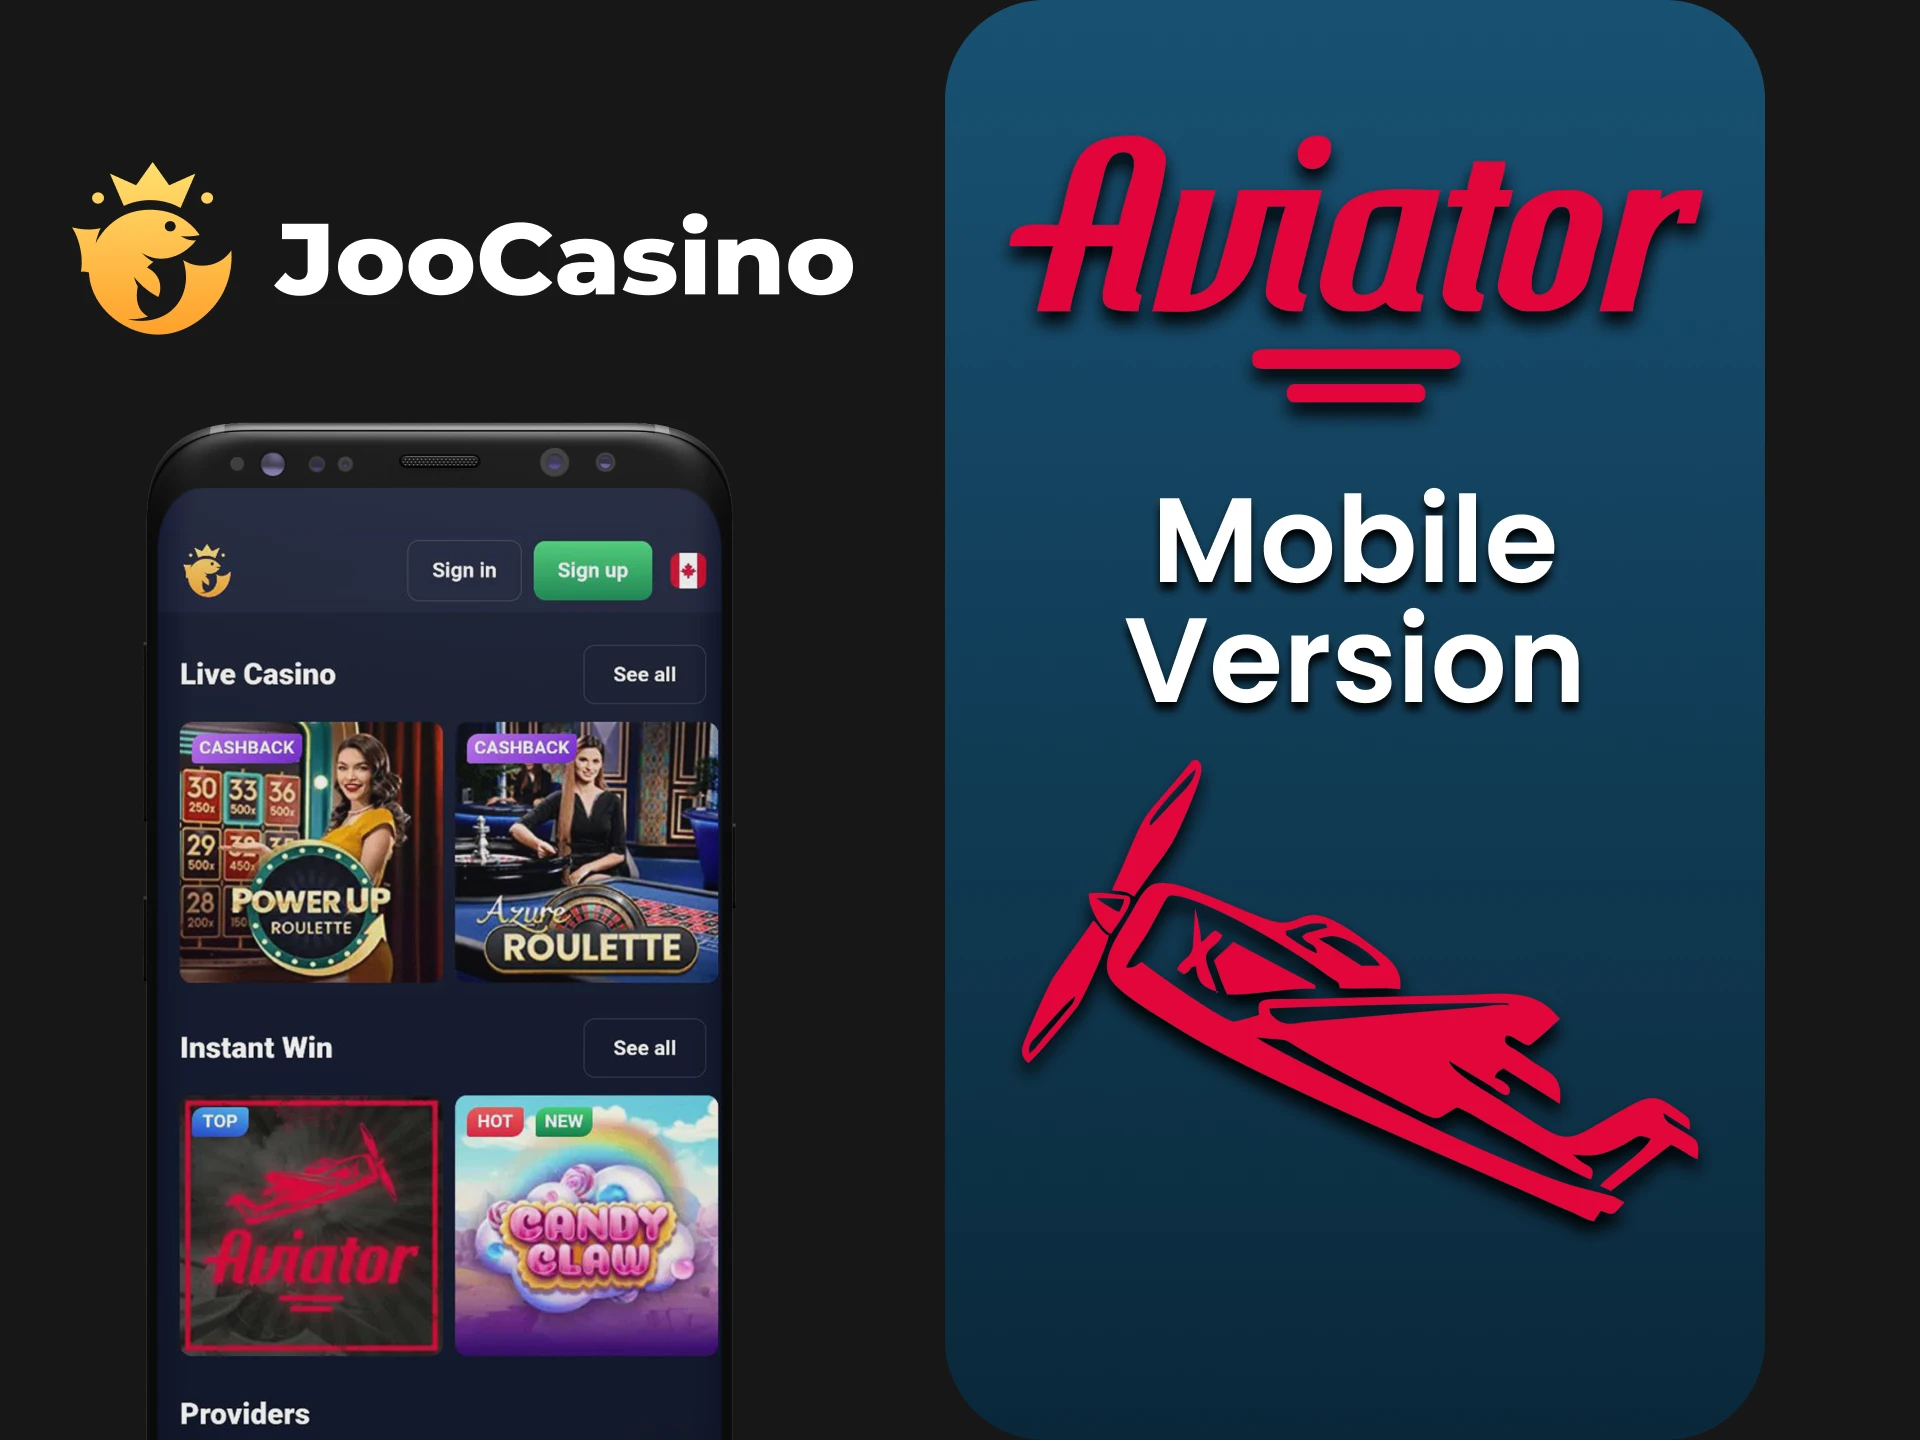 Use the mobile version of the site to play Aviator at Joo Casino.